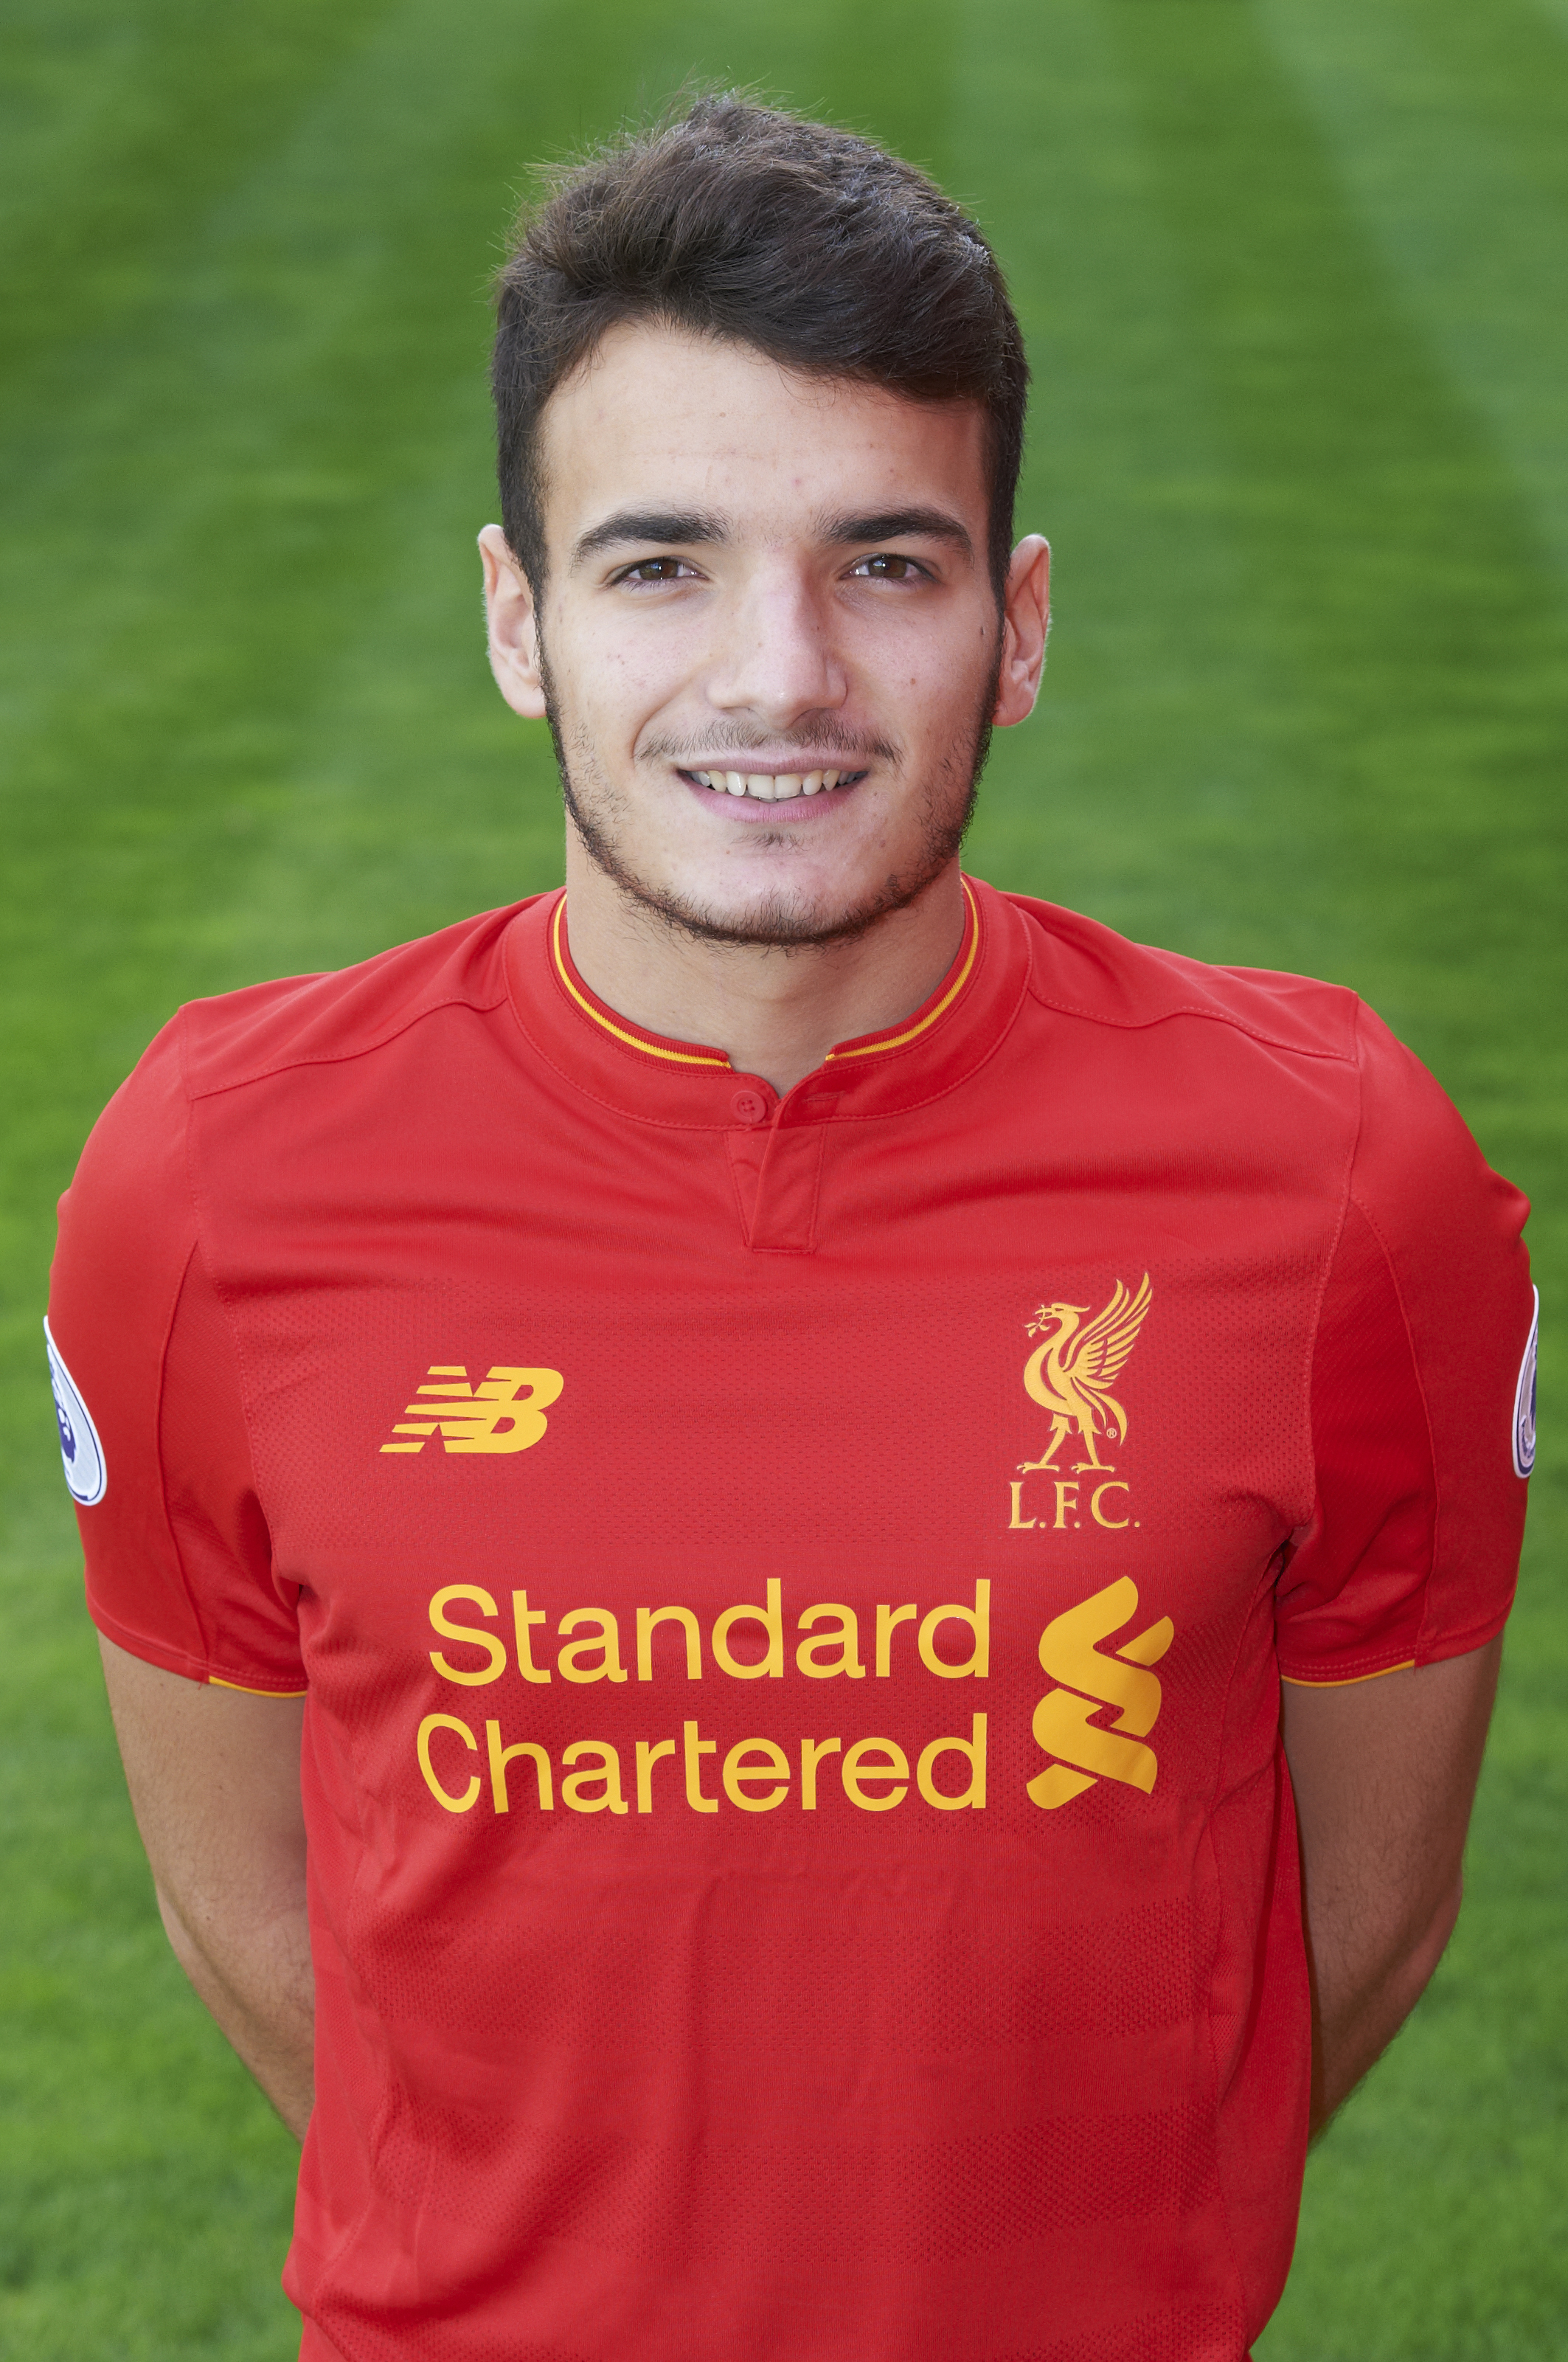 LIVERPOOL, ENGLAND - AUGUST 05: (THE SUN OUT, THE SUN ON SUNDAY OUT) Pedro Chirivella of Liverpool poses for a portrait at Melwood Training Ground on August 5, 2016 in Liverpool, England. (Photo by Nick Taylor/Liverpool FC/Liverpool FC via Getty Images)